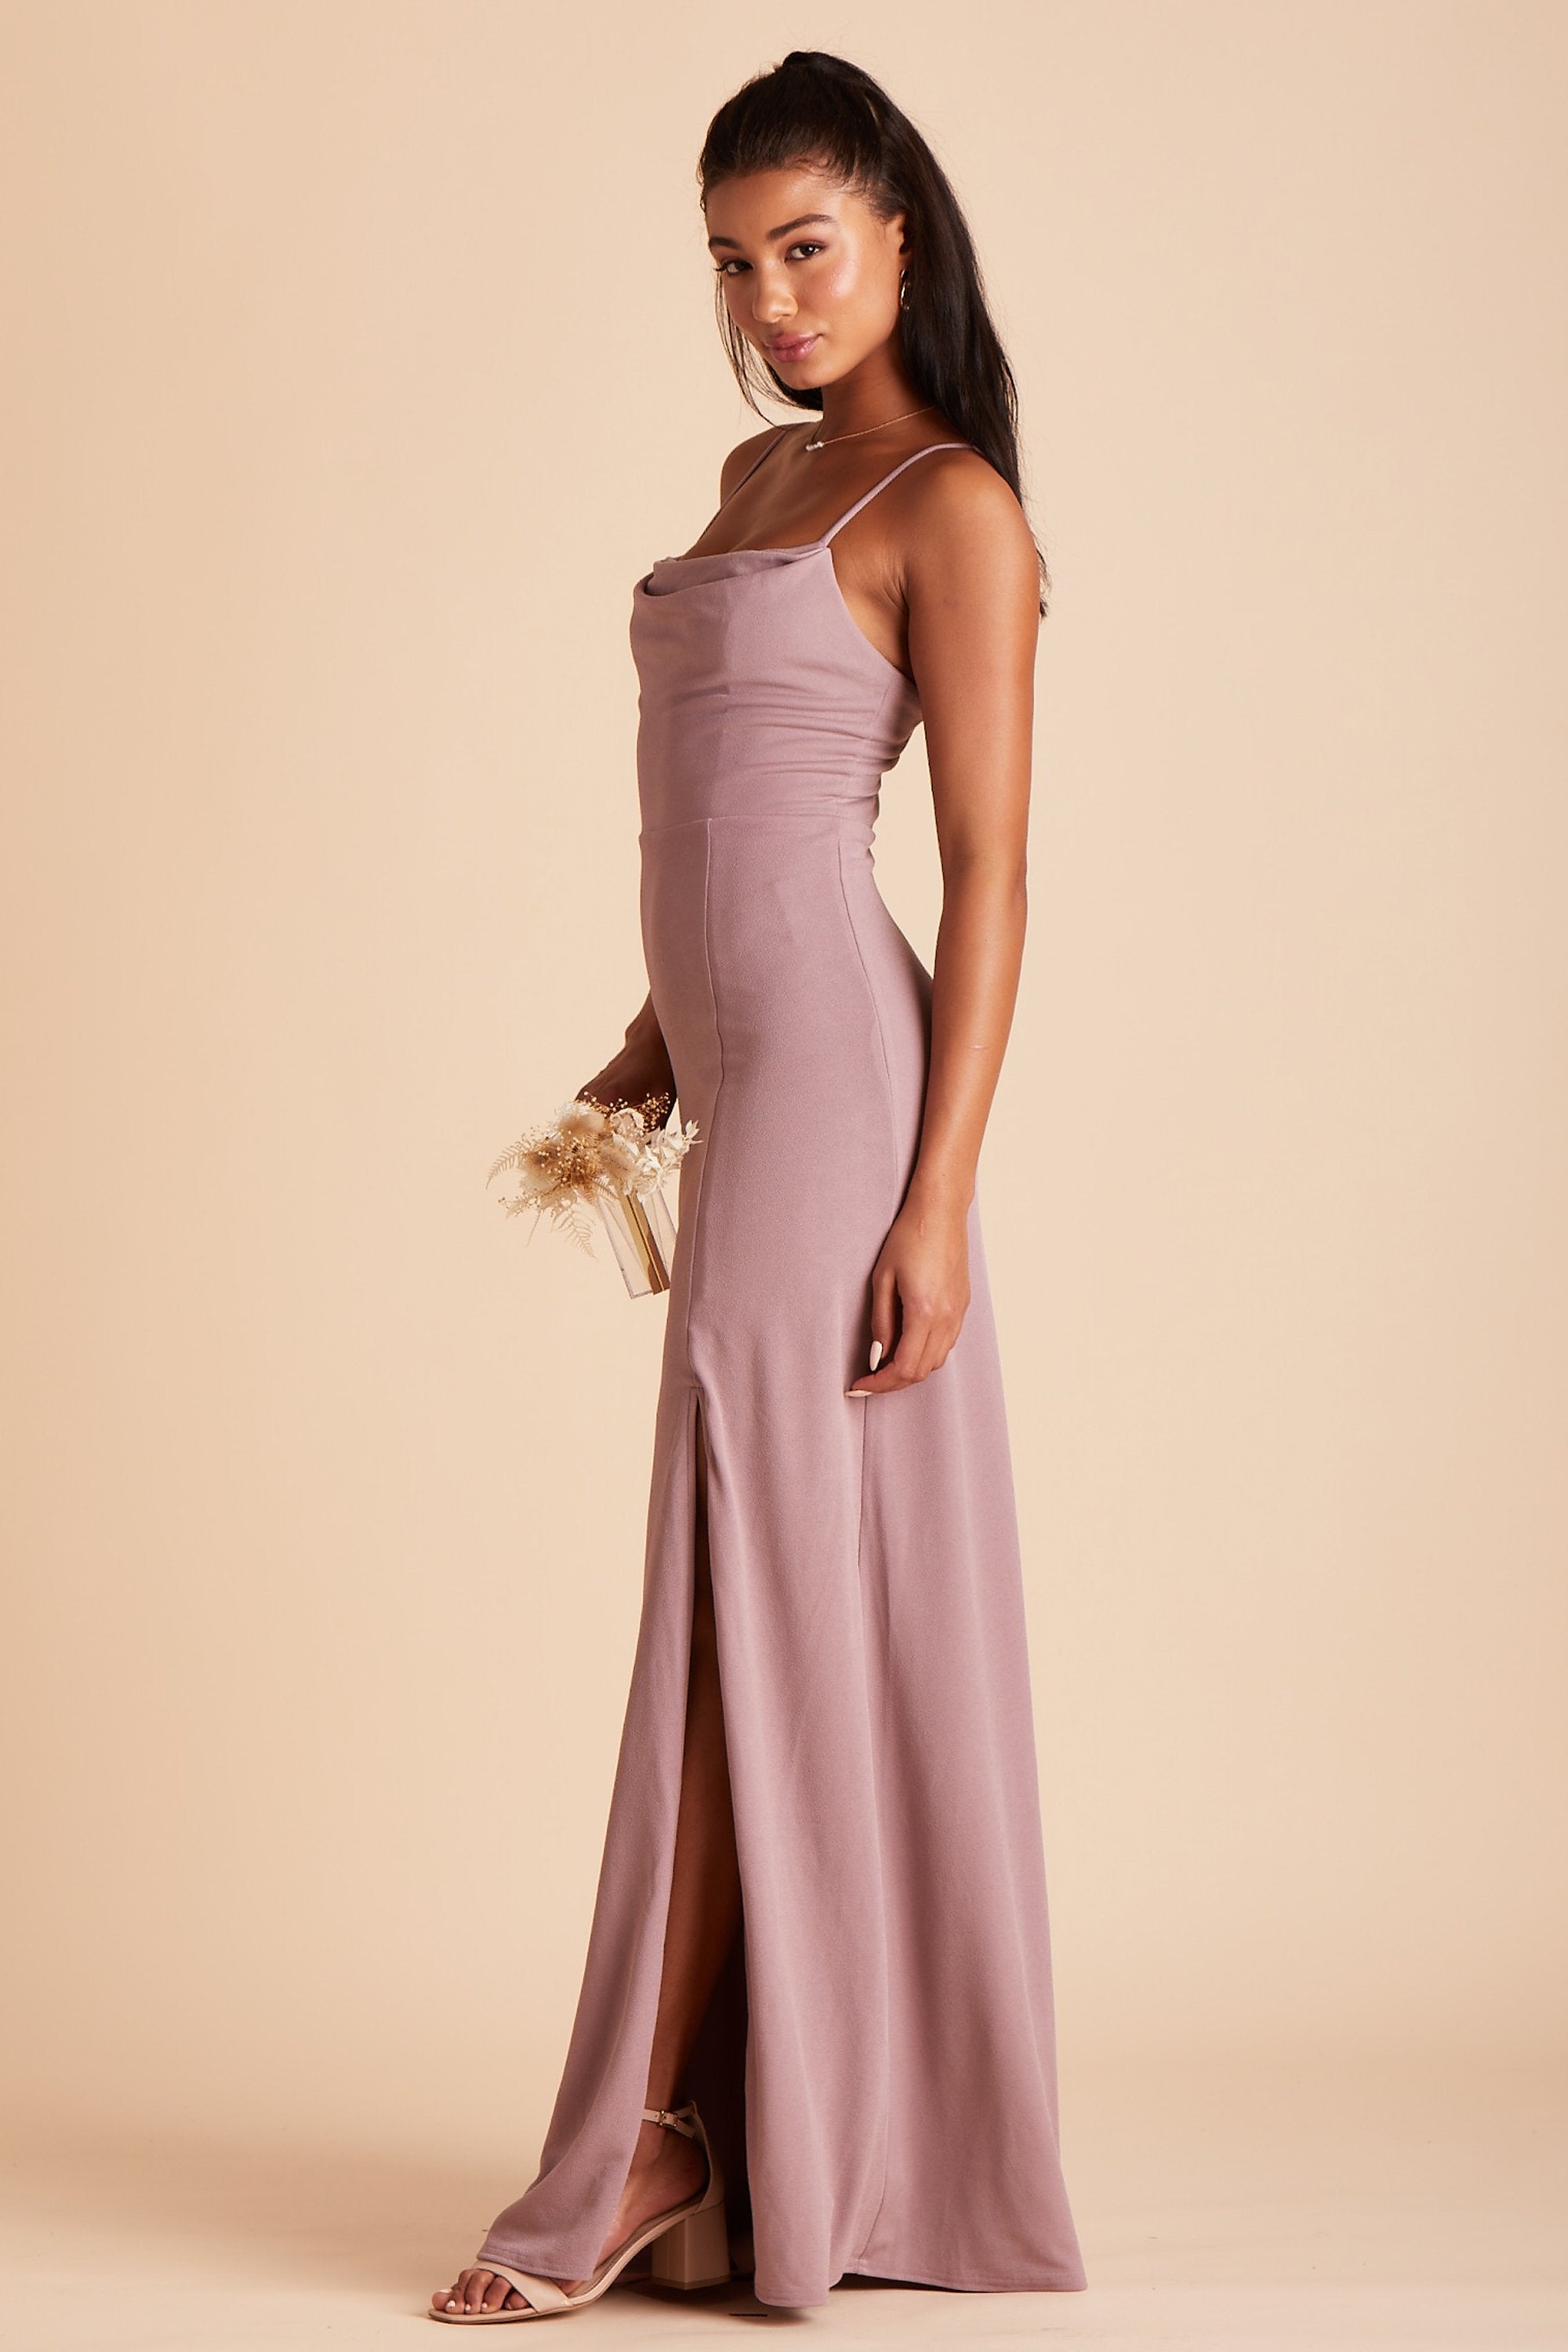 Ash bridesmaid dress with slit in dark mauve crepe by Birdy Grey, side view